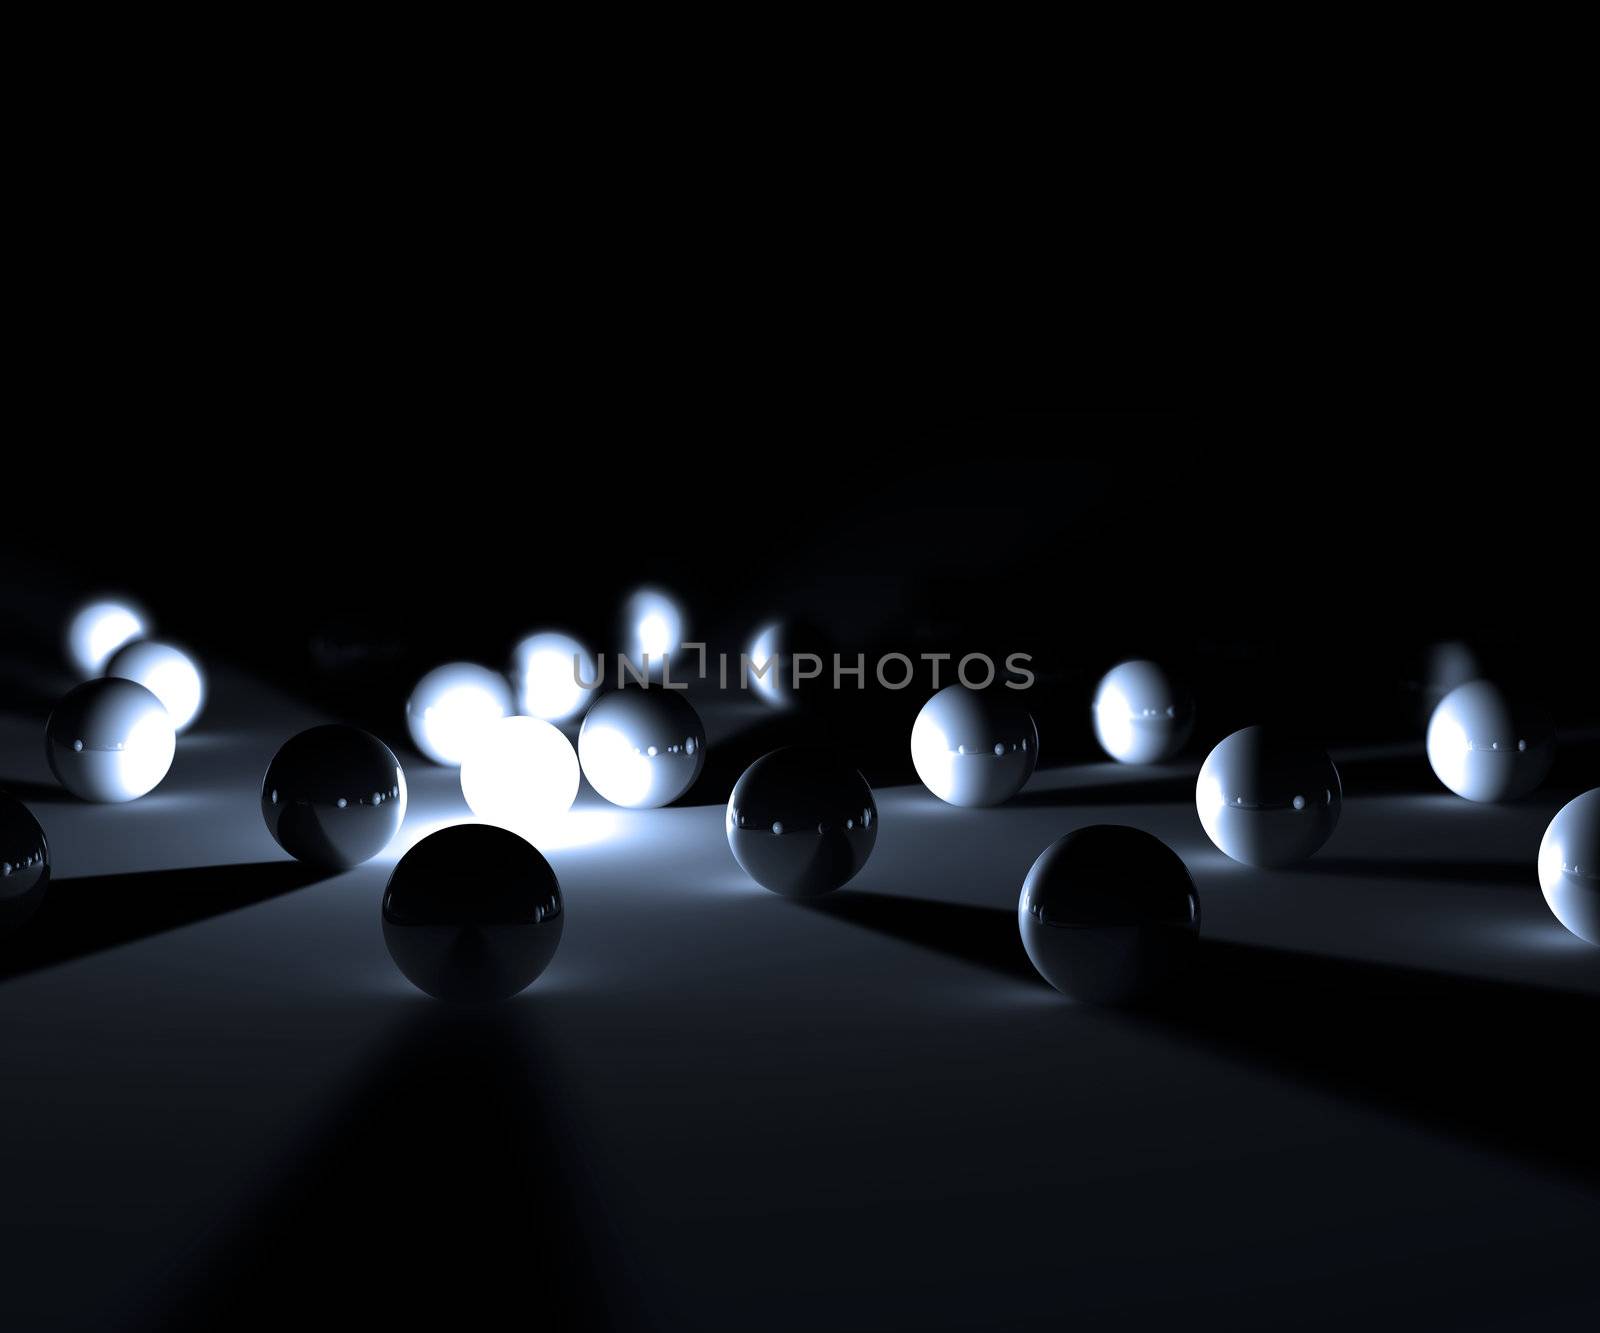 One light ball and many white balls